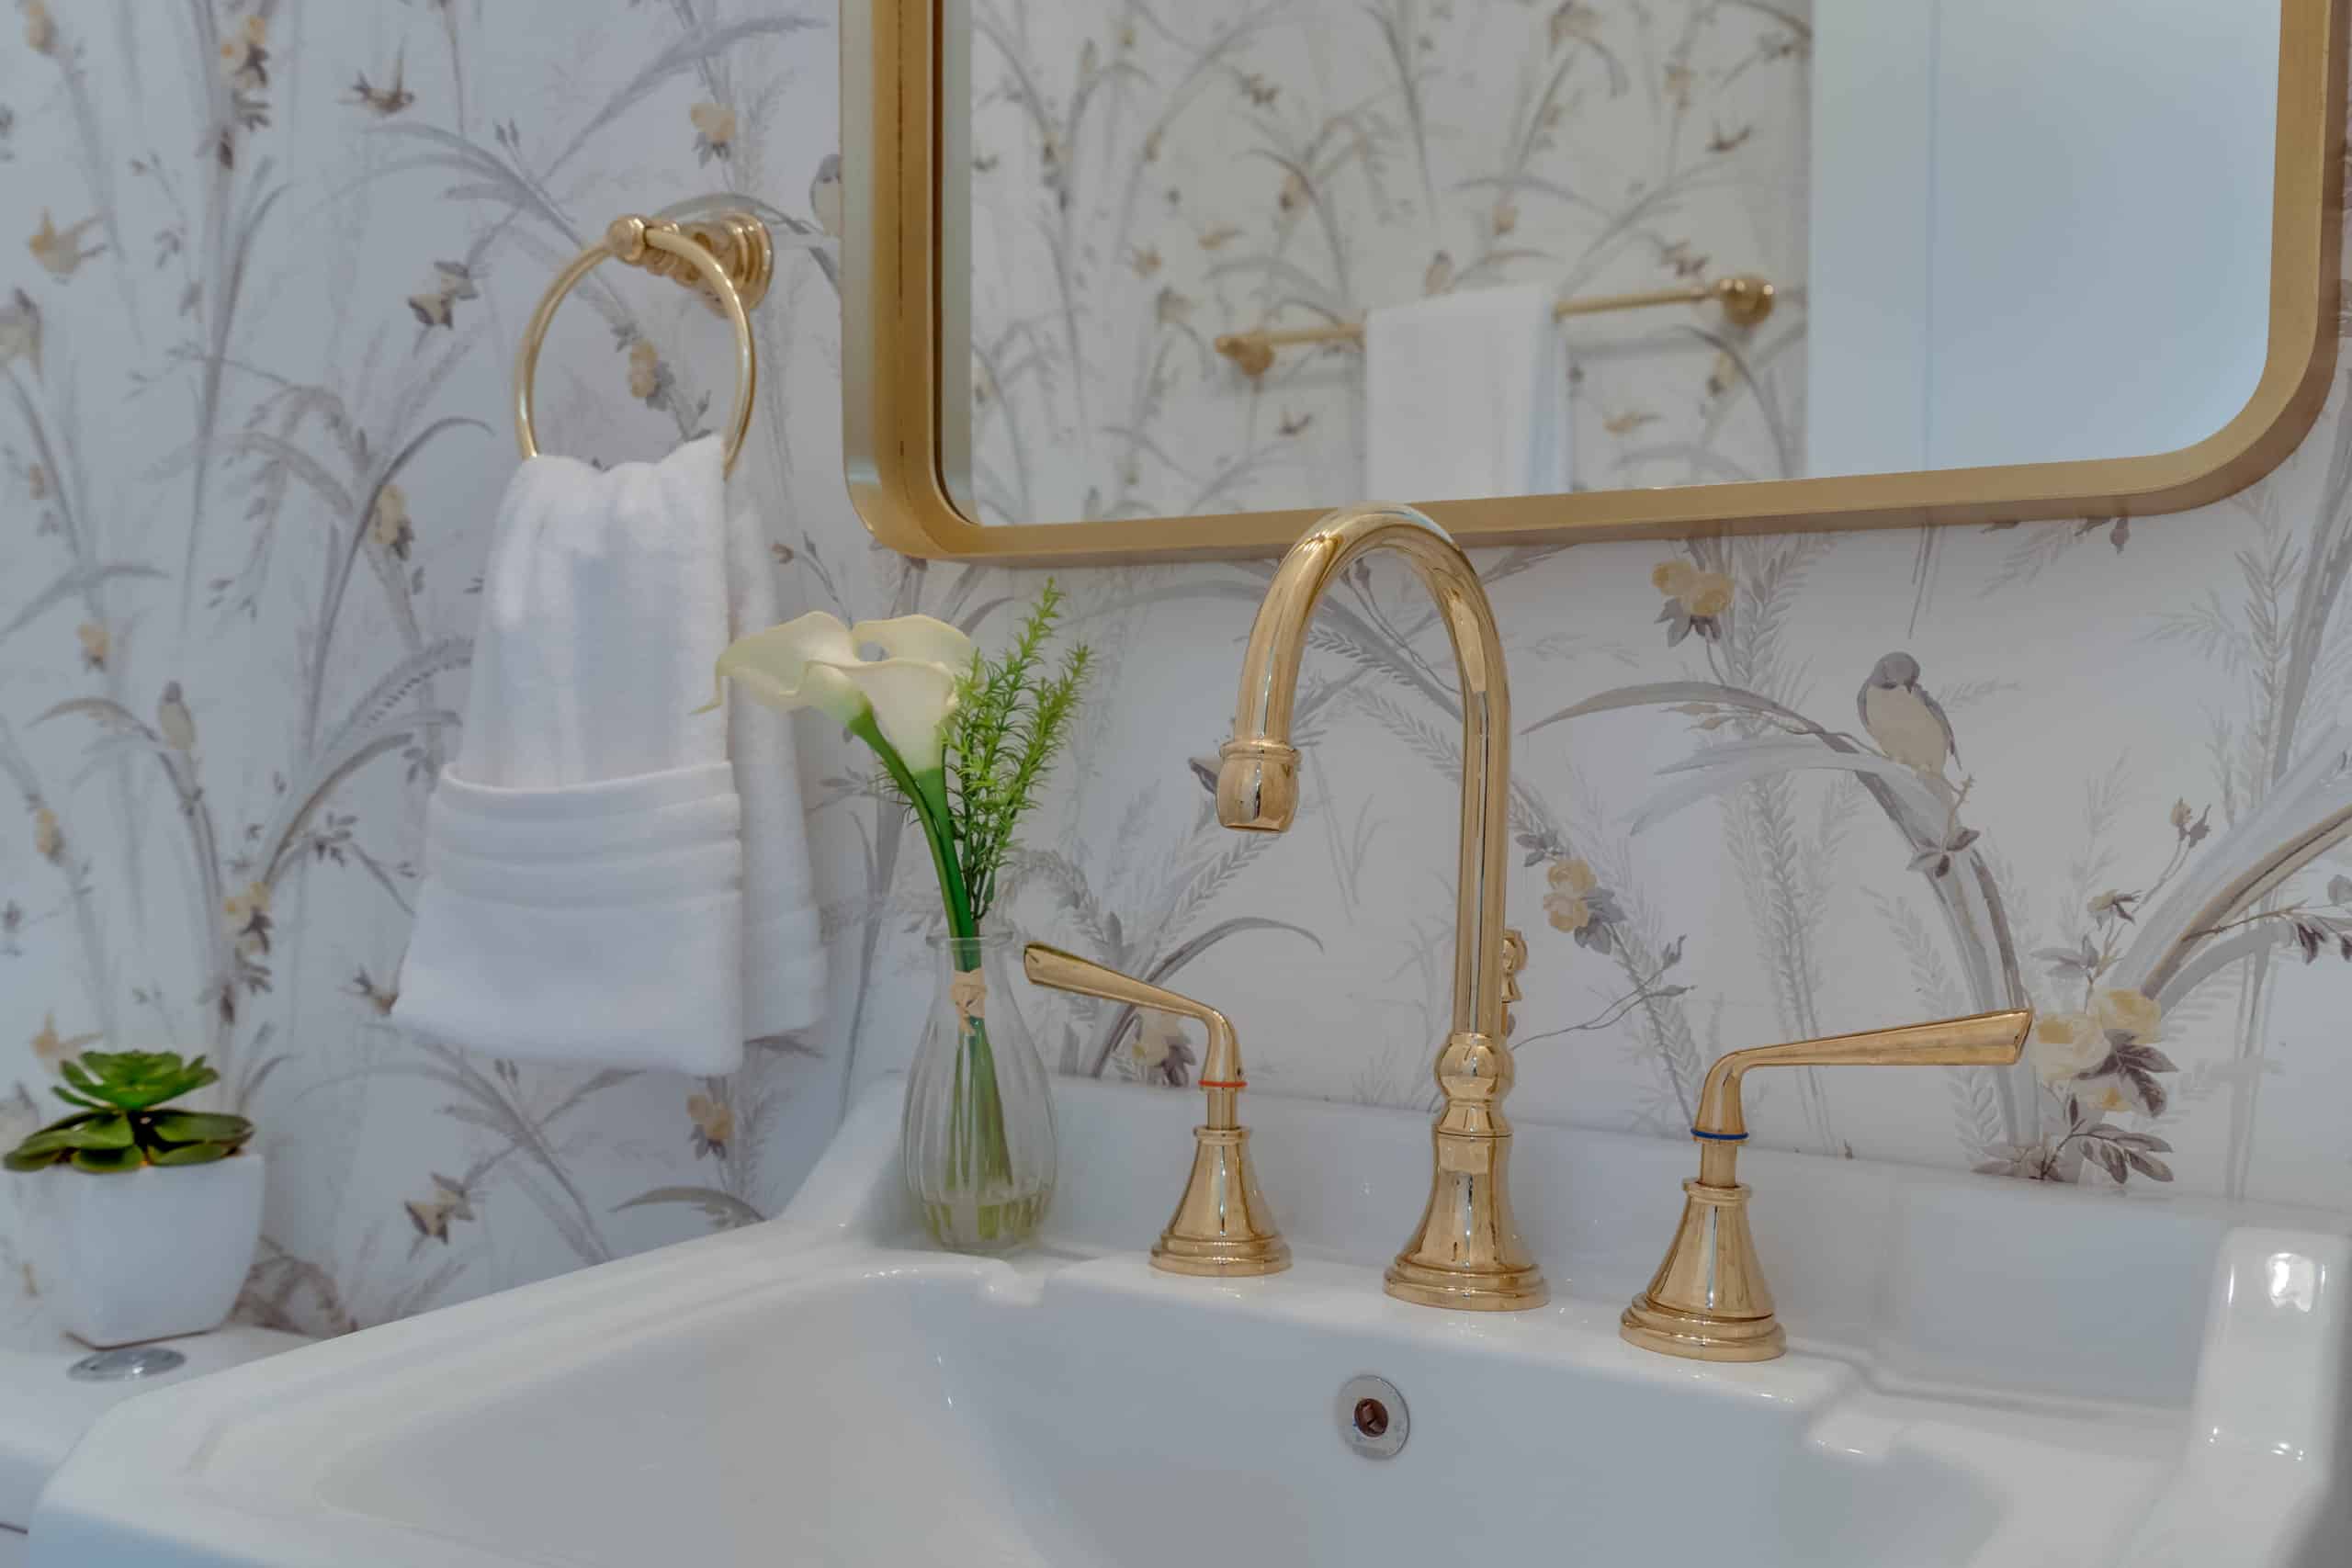 Sink with gold faucets